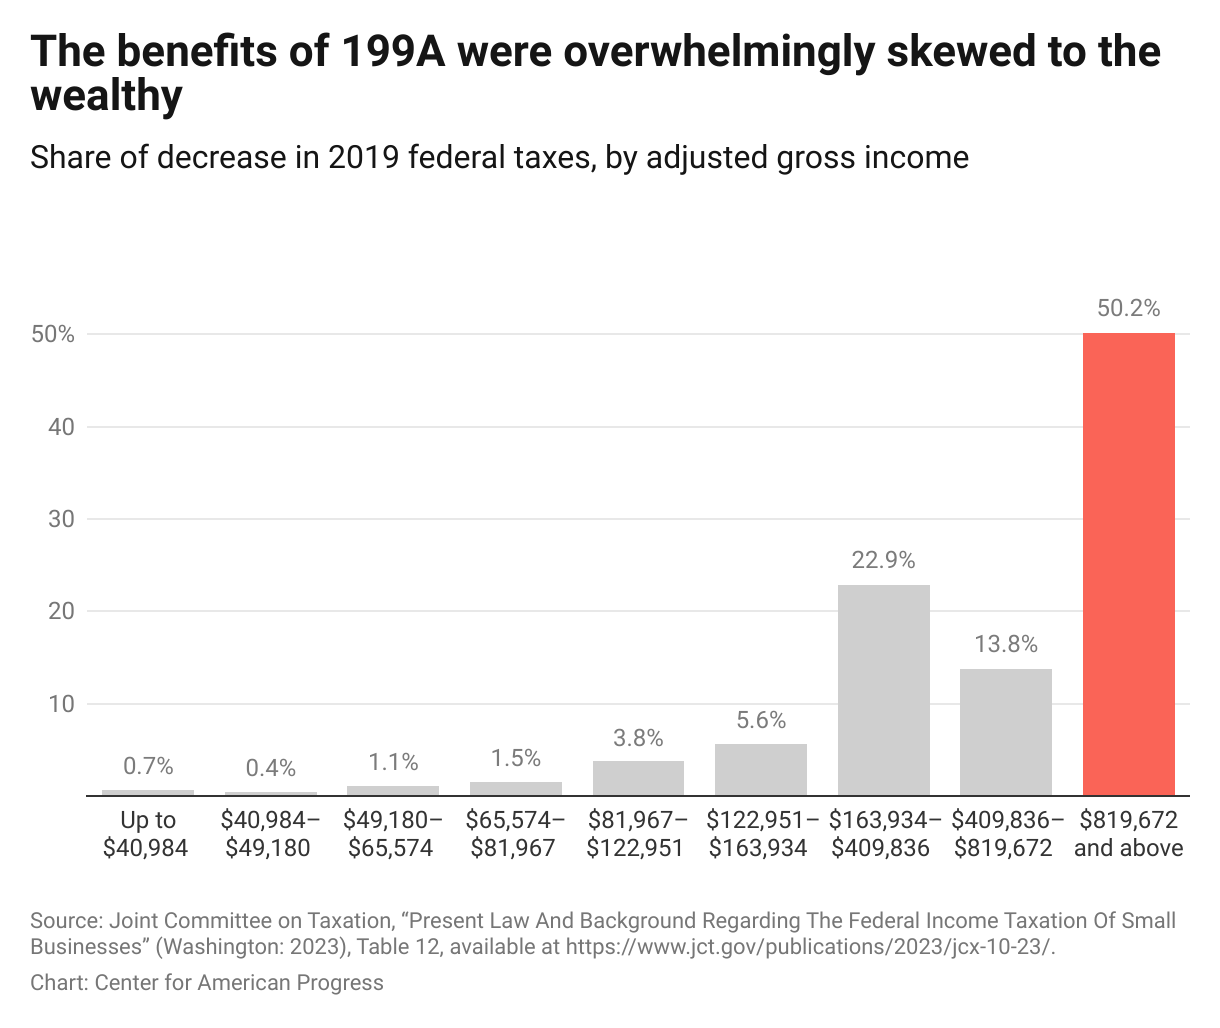 Column graph showing that half of the tax benefits from the 199A deduction went to the highest income filers, those with incomes of $819,672 and above in 2019